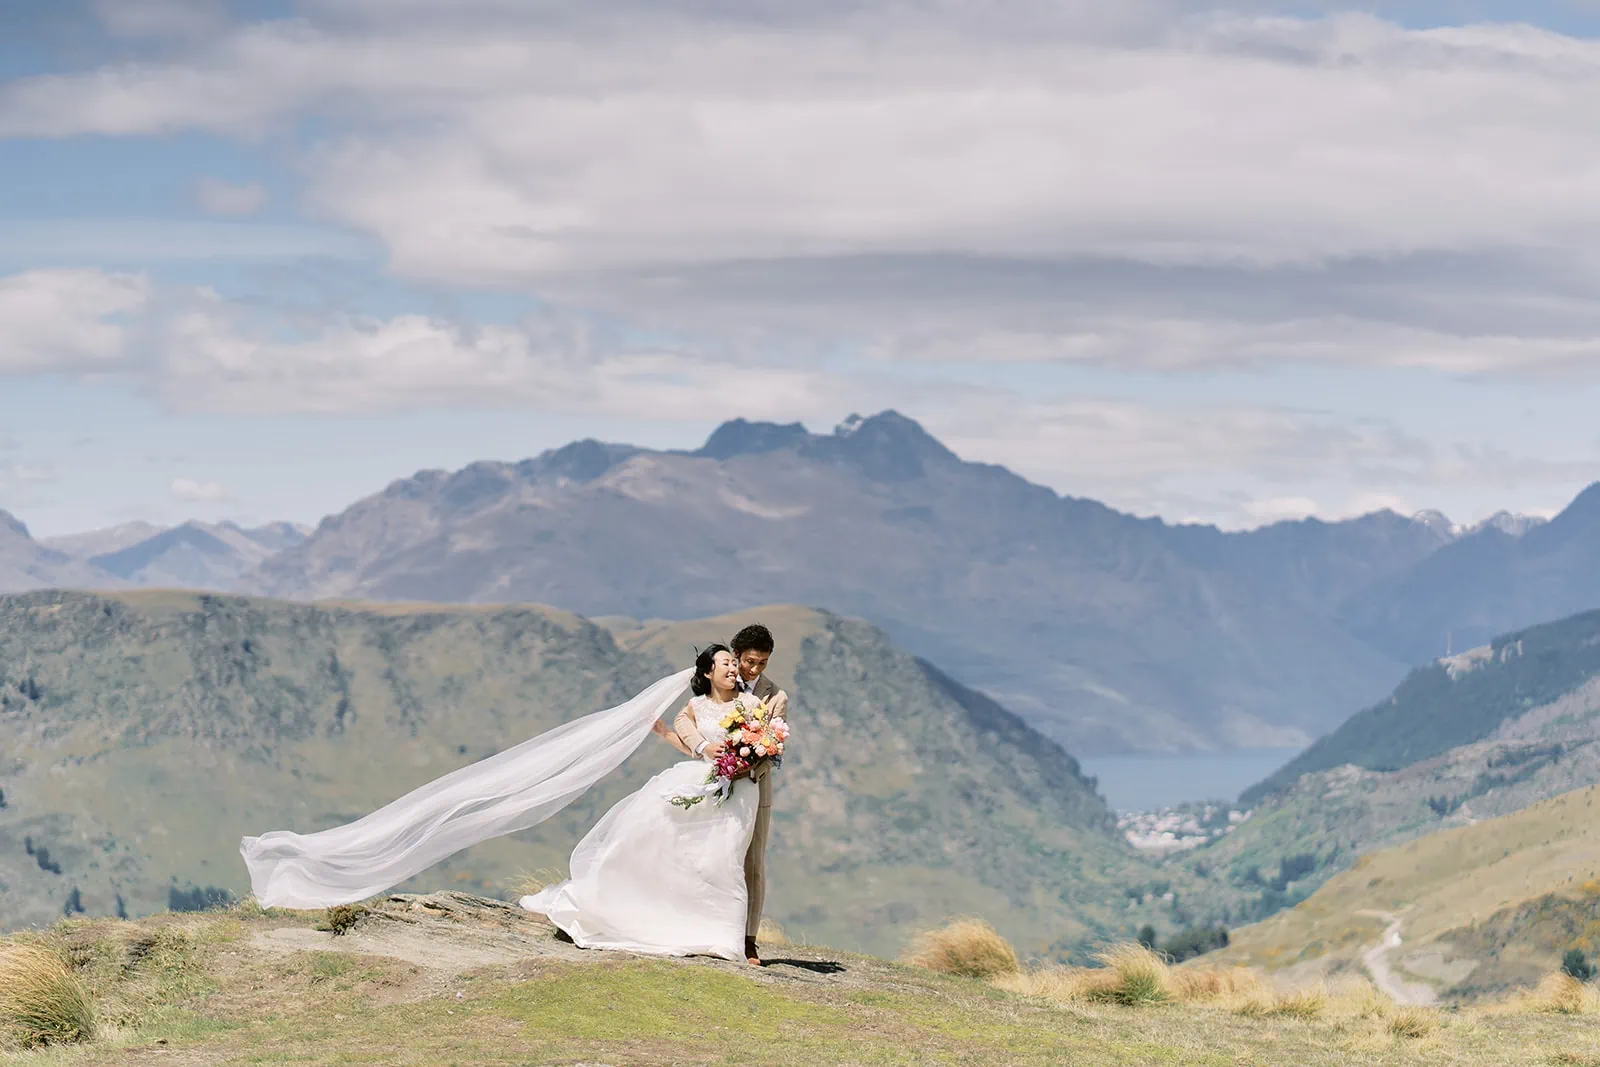 Queenstown Elopement Heli Wedding Photographer クイーンズタウン結婚式 | Saki & Taisei's Queenstown Heli Pre-Wedding Photoshoot captures a breathtaking moment of the bride standing on top of a hill with majestic mountains in the background.